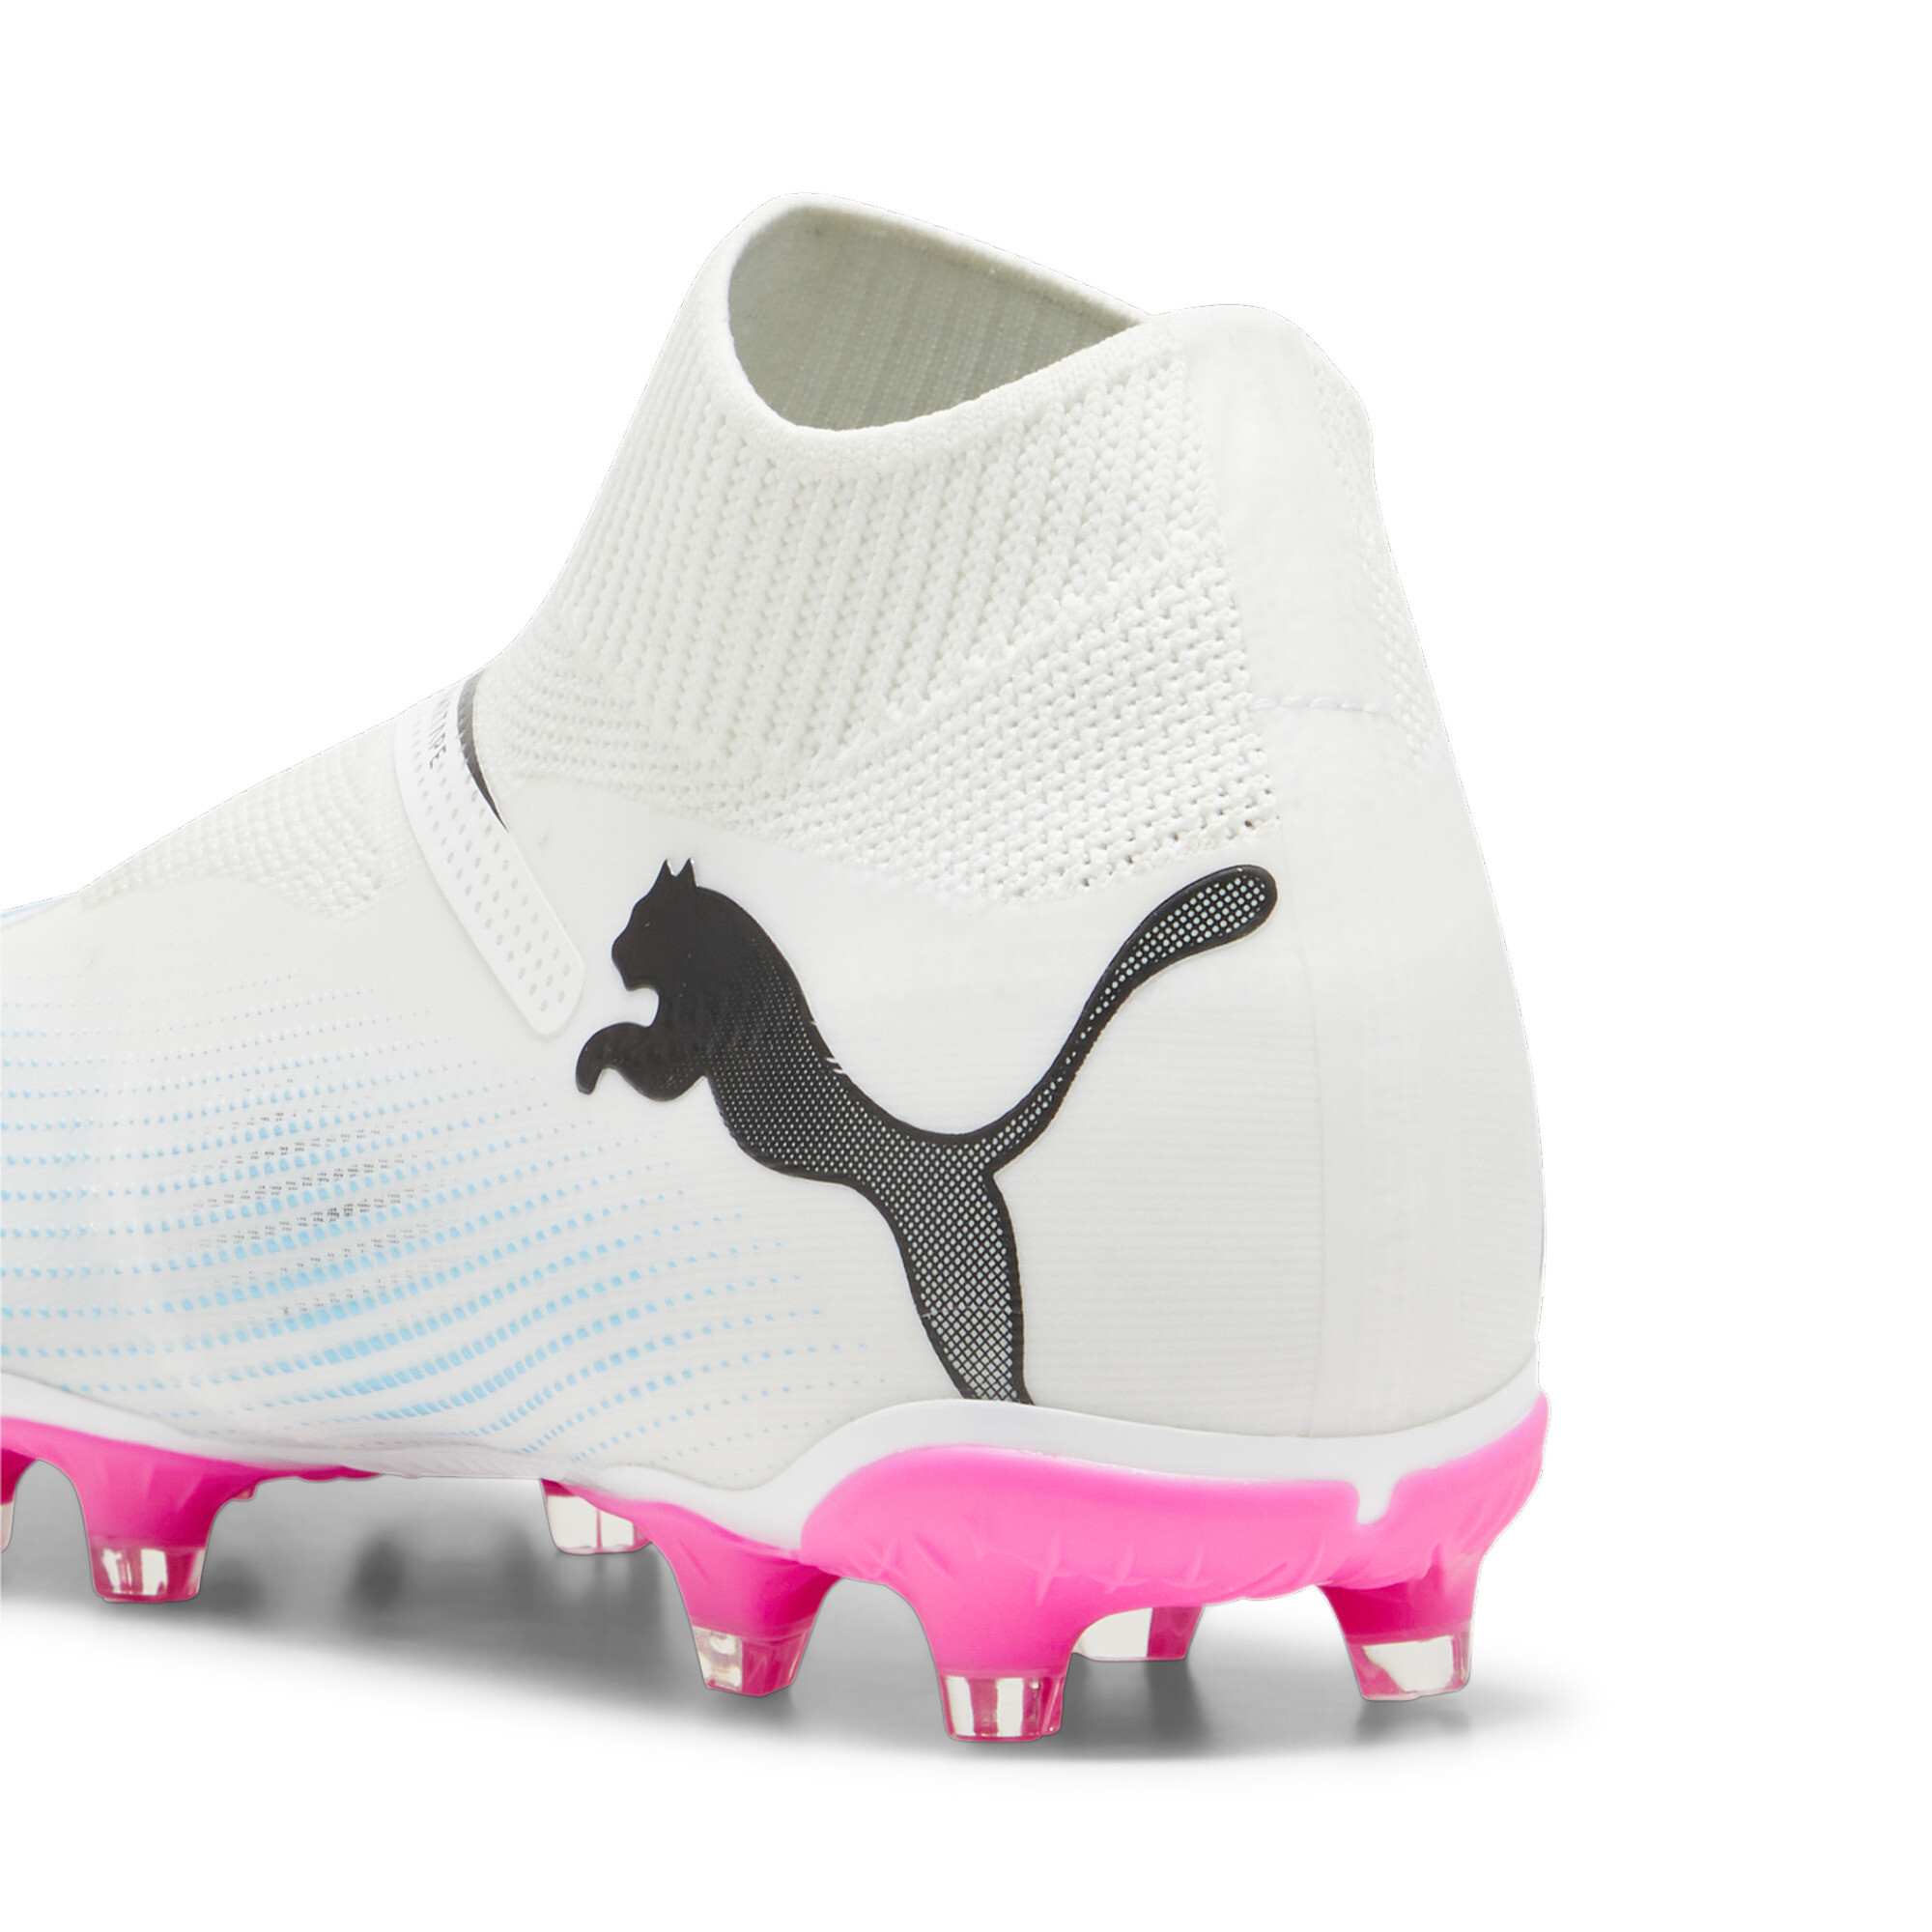 Men's PUMA FUTURE 7 MATCH FG/AG Laceless Football Boots In White/Pink, Size EU 43